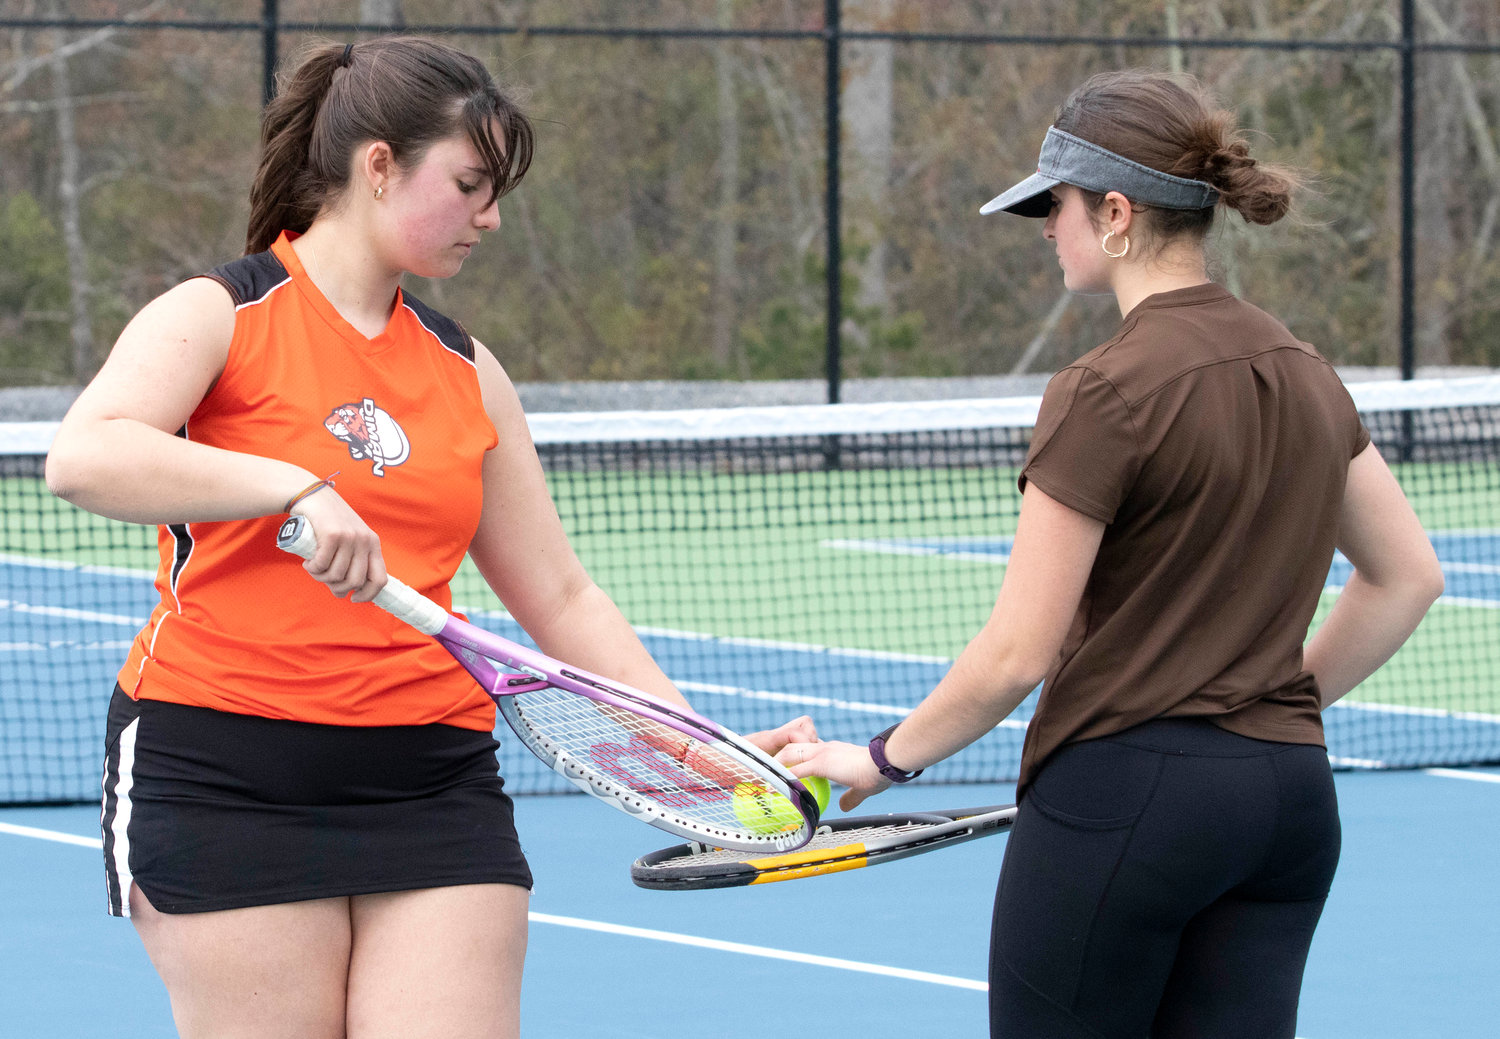 Sarah (left) and younger sister, Gloria both second singles players, squared off during the Diman vs Westport match. The young sister prevailed in straight sets.